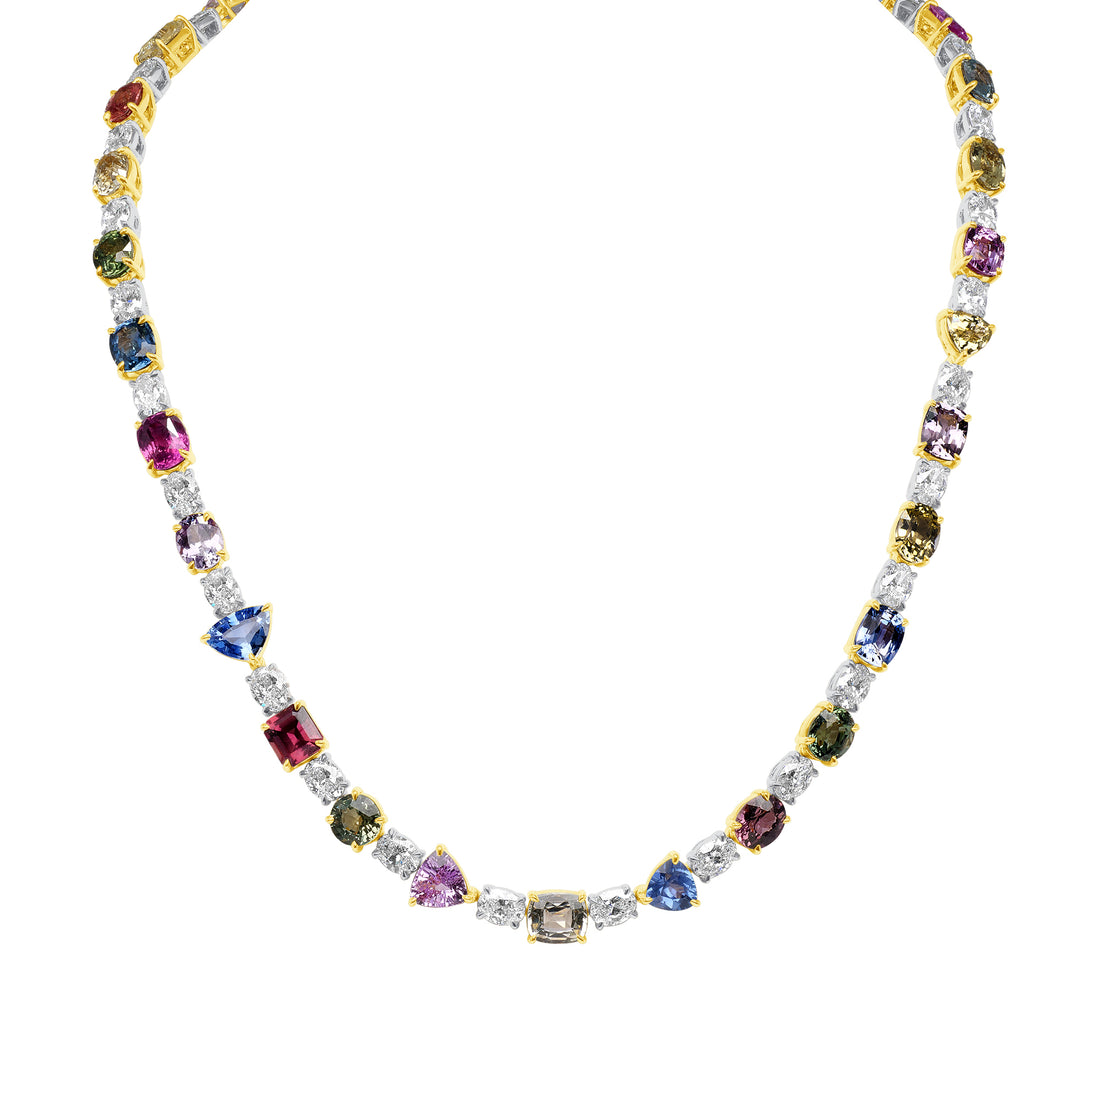 53.06 CT. Fancy Shape Sapphire and Oval Cut Diamond Tennis Necklace in 18K White Gold and Yellow Gold